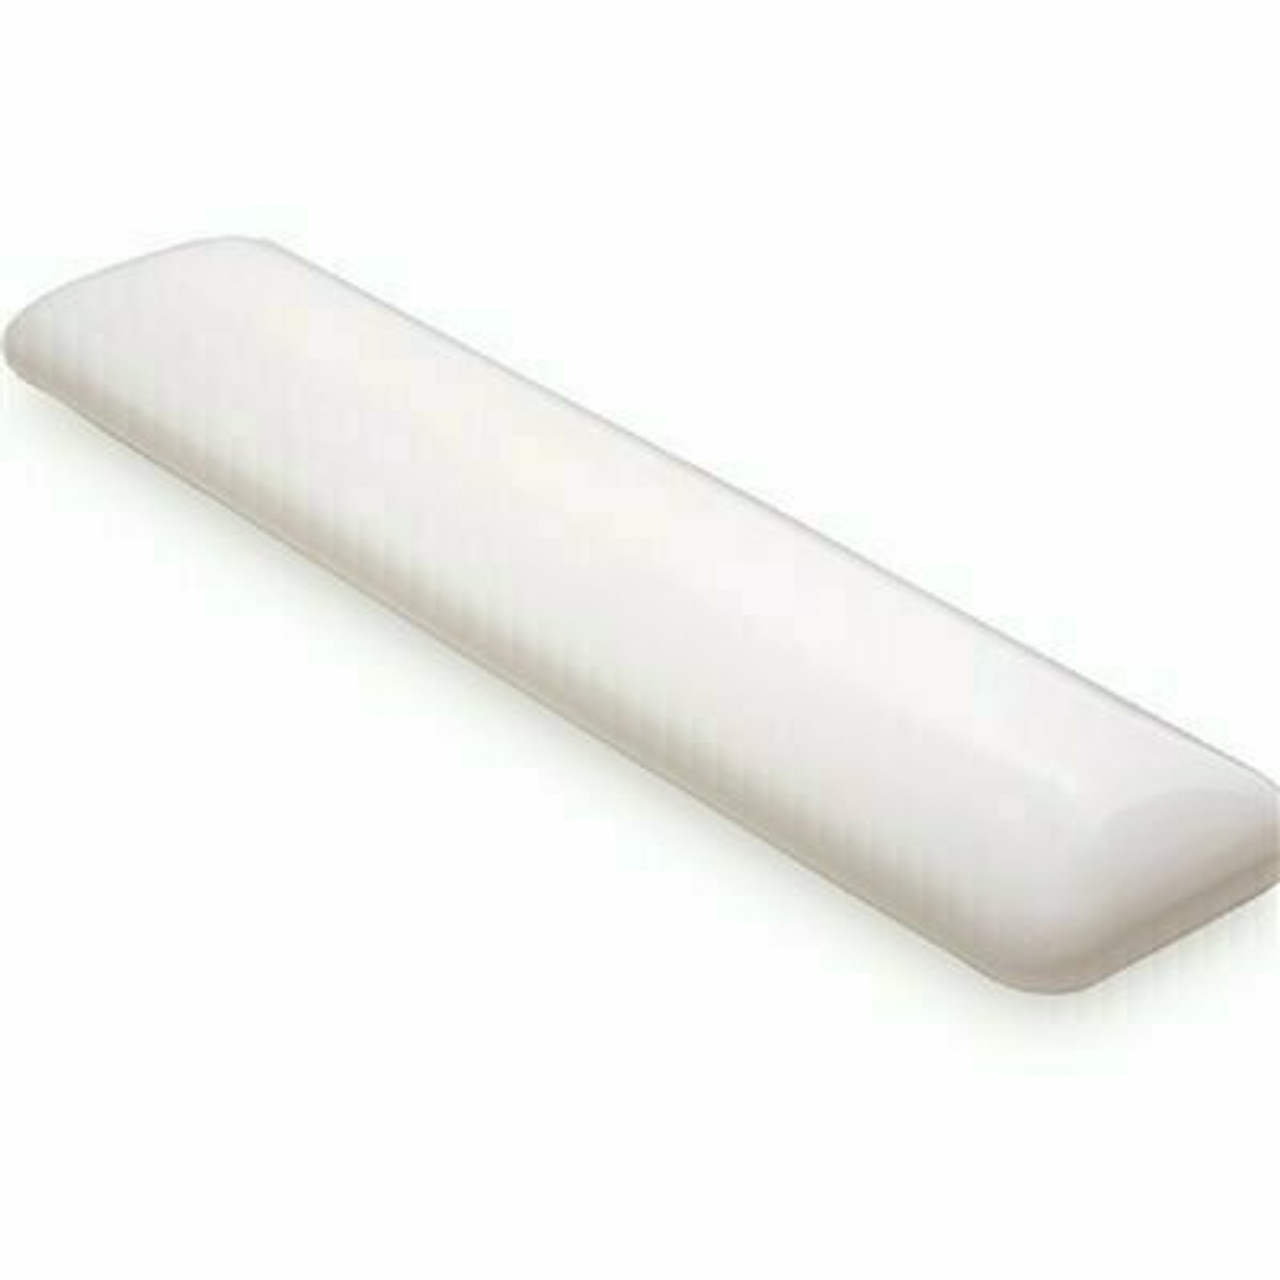 Lithonia Lighting 1 Ft. X 4 Ft. White Acrylic Diffuser Lite Puff Linear Fixtures